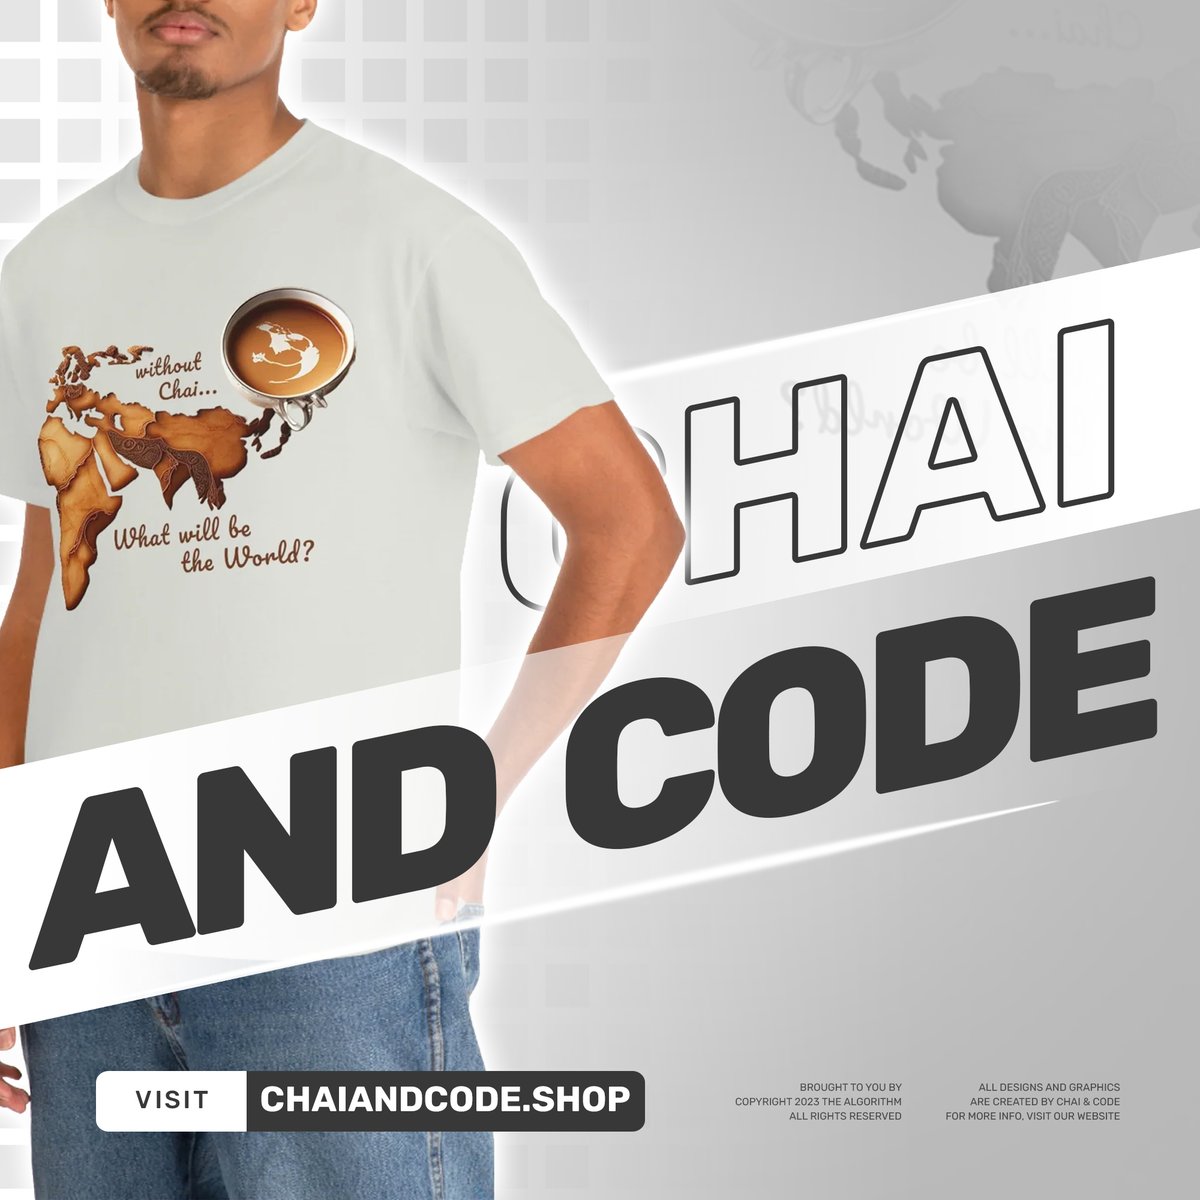 Drink your tea slowly and reverently, as if it is the axis on which the world earth revolves ~ slowly, evenly, without rushing toward the future. 

Check out this Chai Tshirt! ☕☕☕
chaiandcode.shop/products/what-…

#chaiandcode #chaiworld #teaworld #welovechai #welovetea #worldandchai